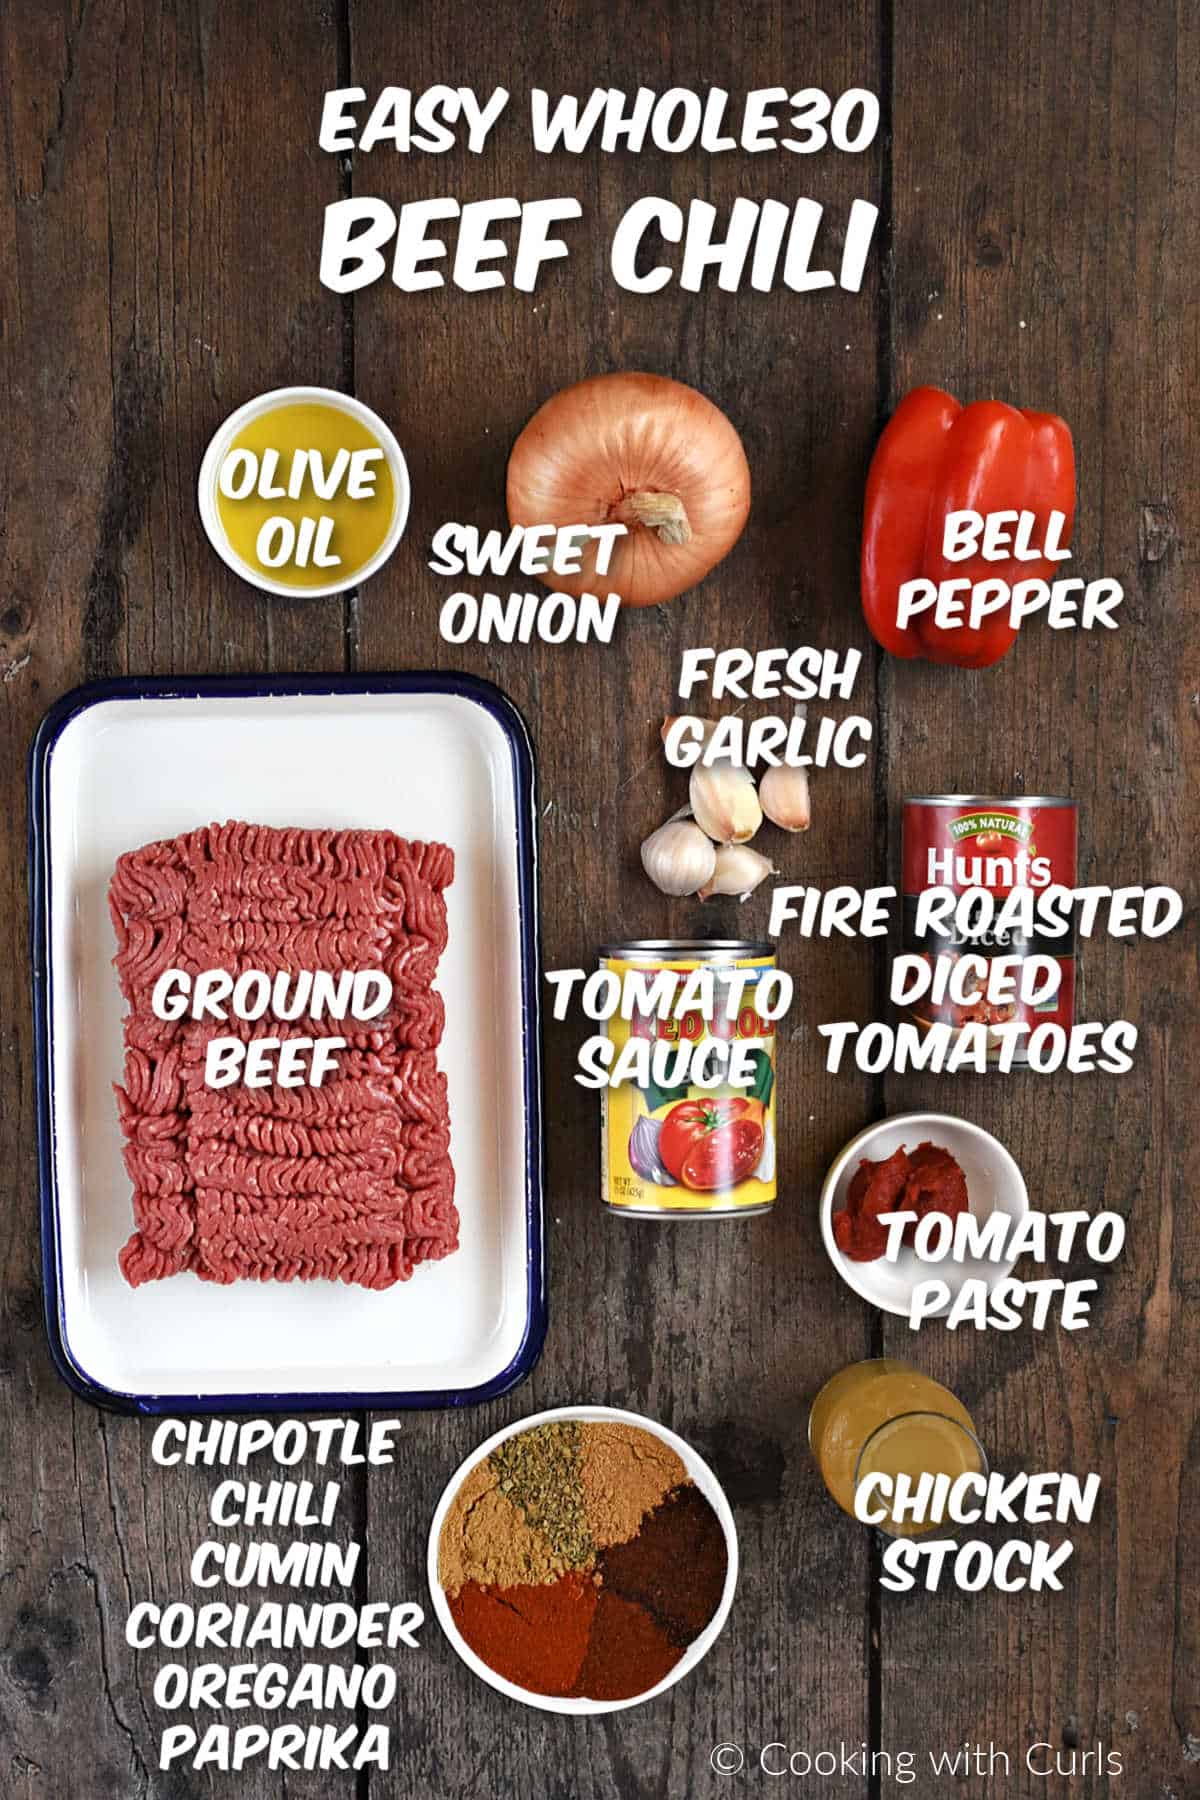 Ingredients needed to make easy whole30 beef chili.